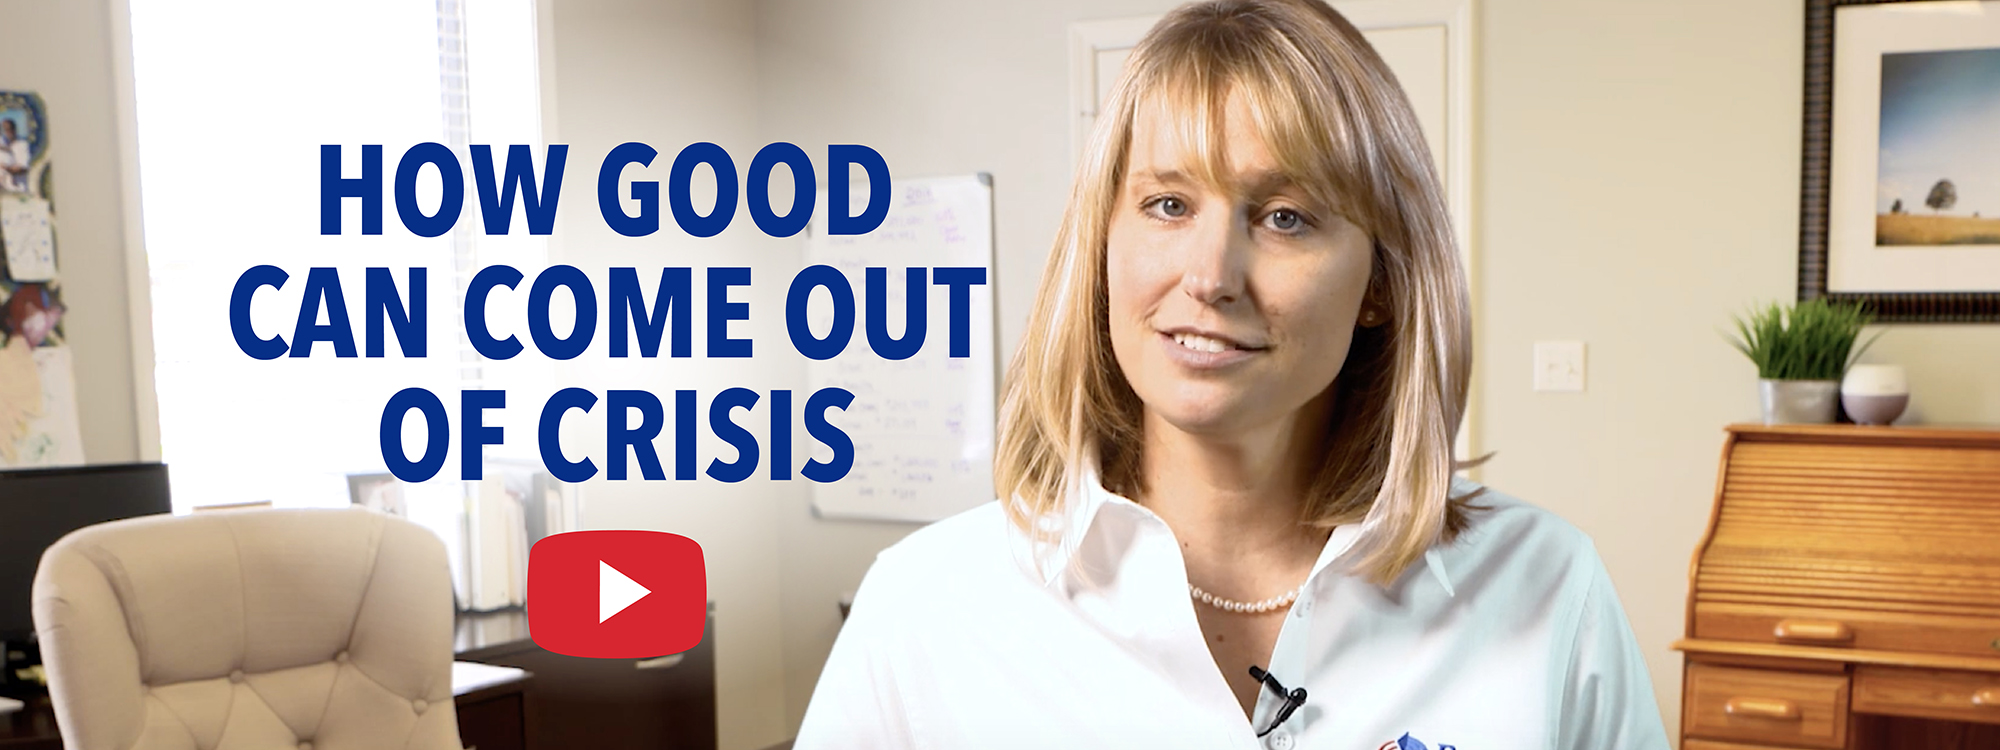 How good can come out of crisis